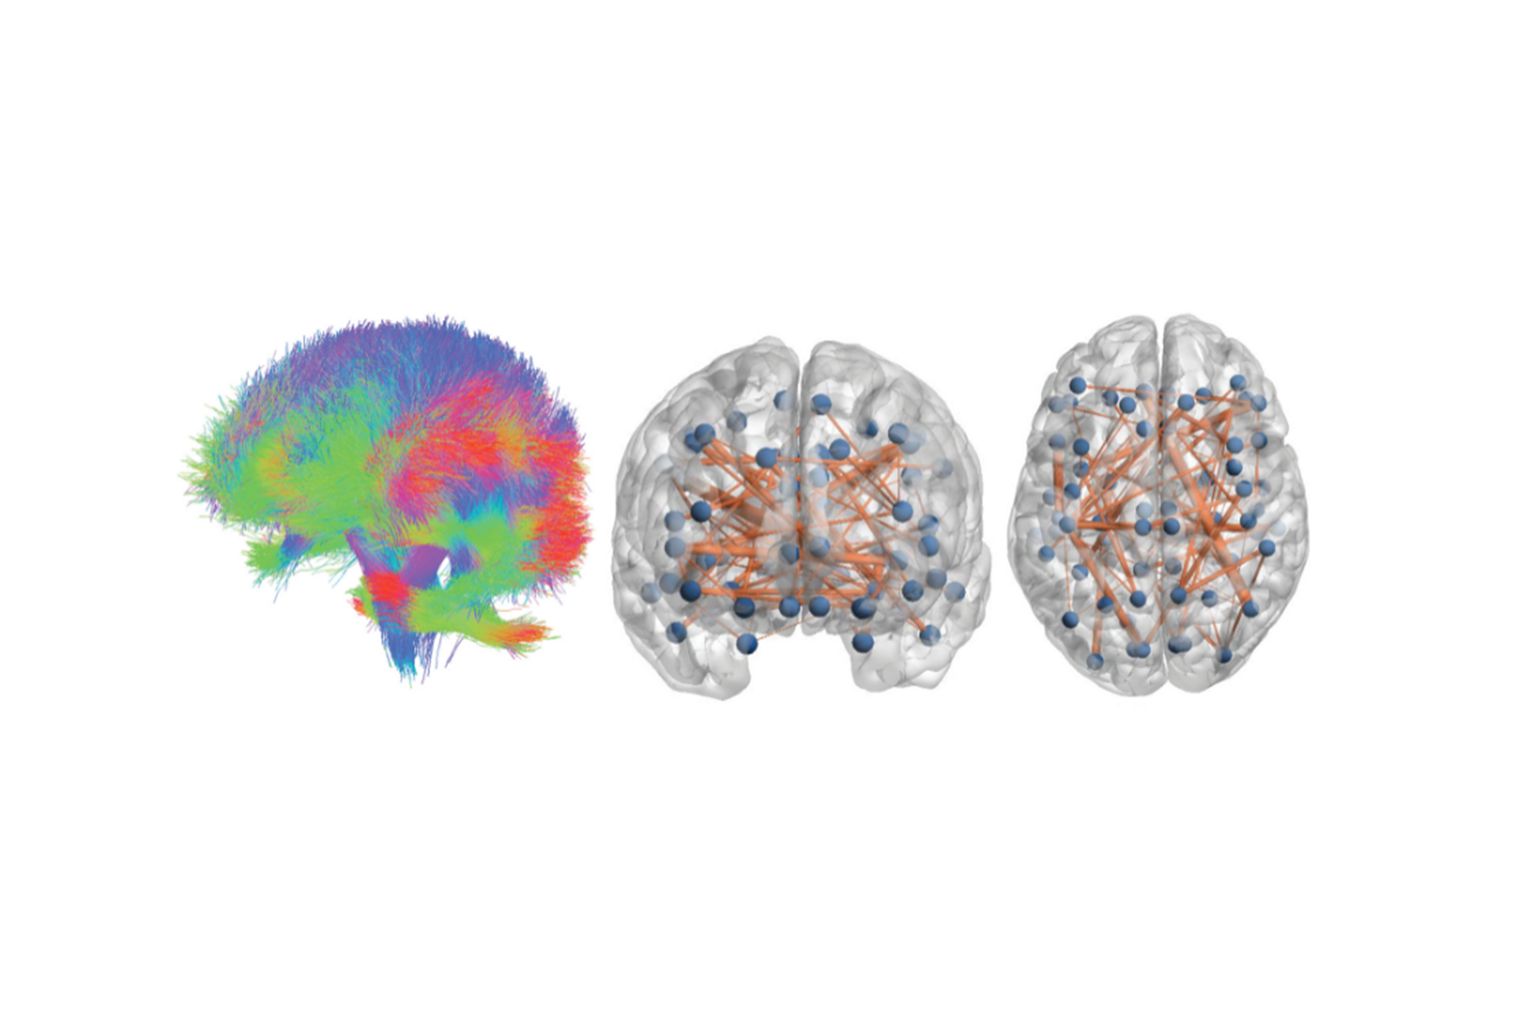 Personalised Brain Models Improve Clinical Prediction In Multiple Sclerosis